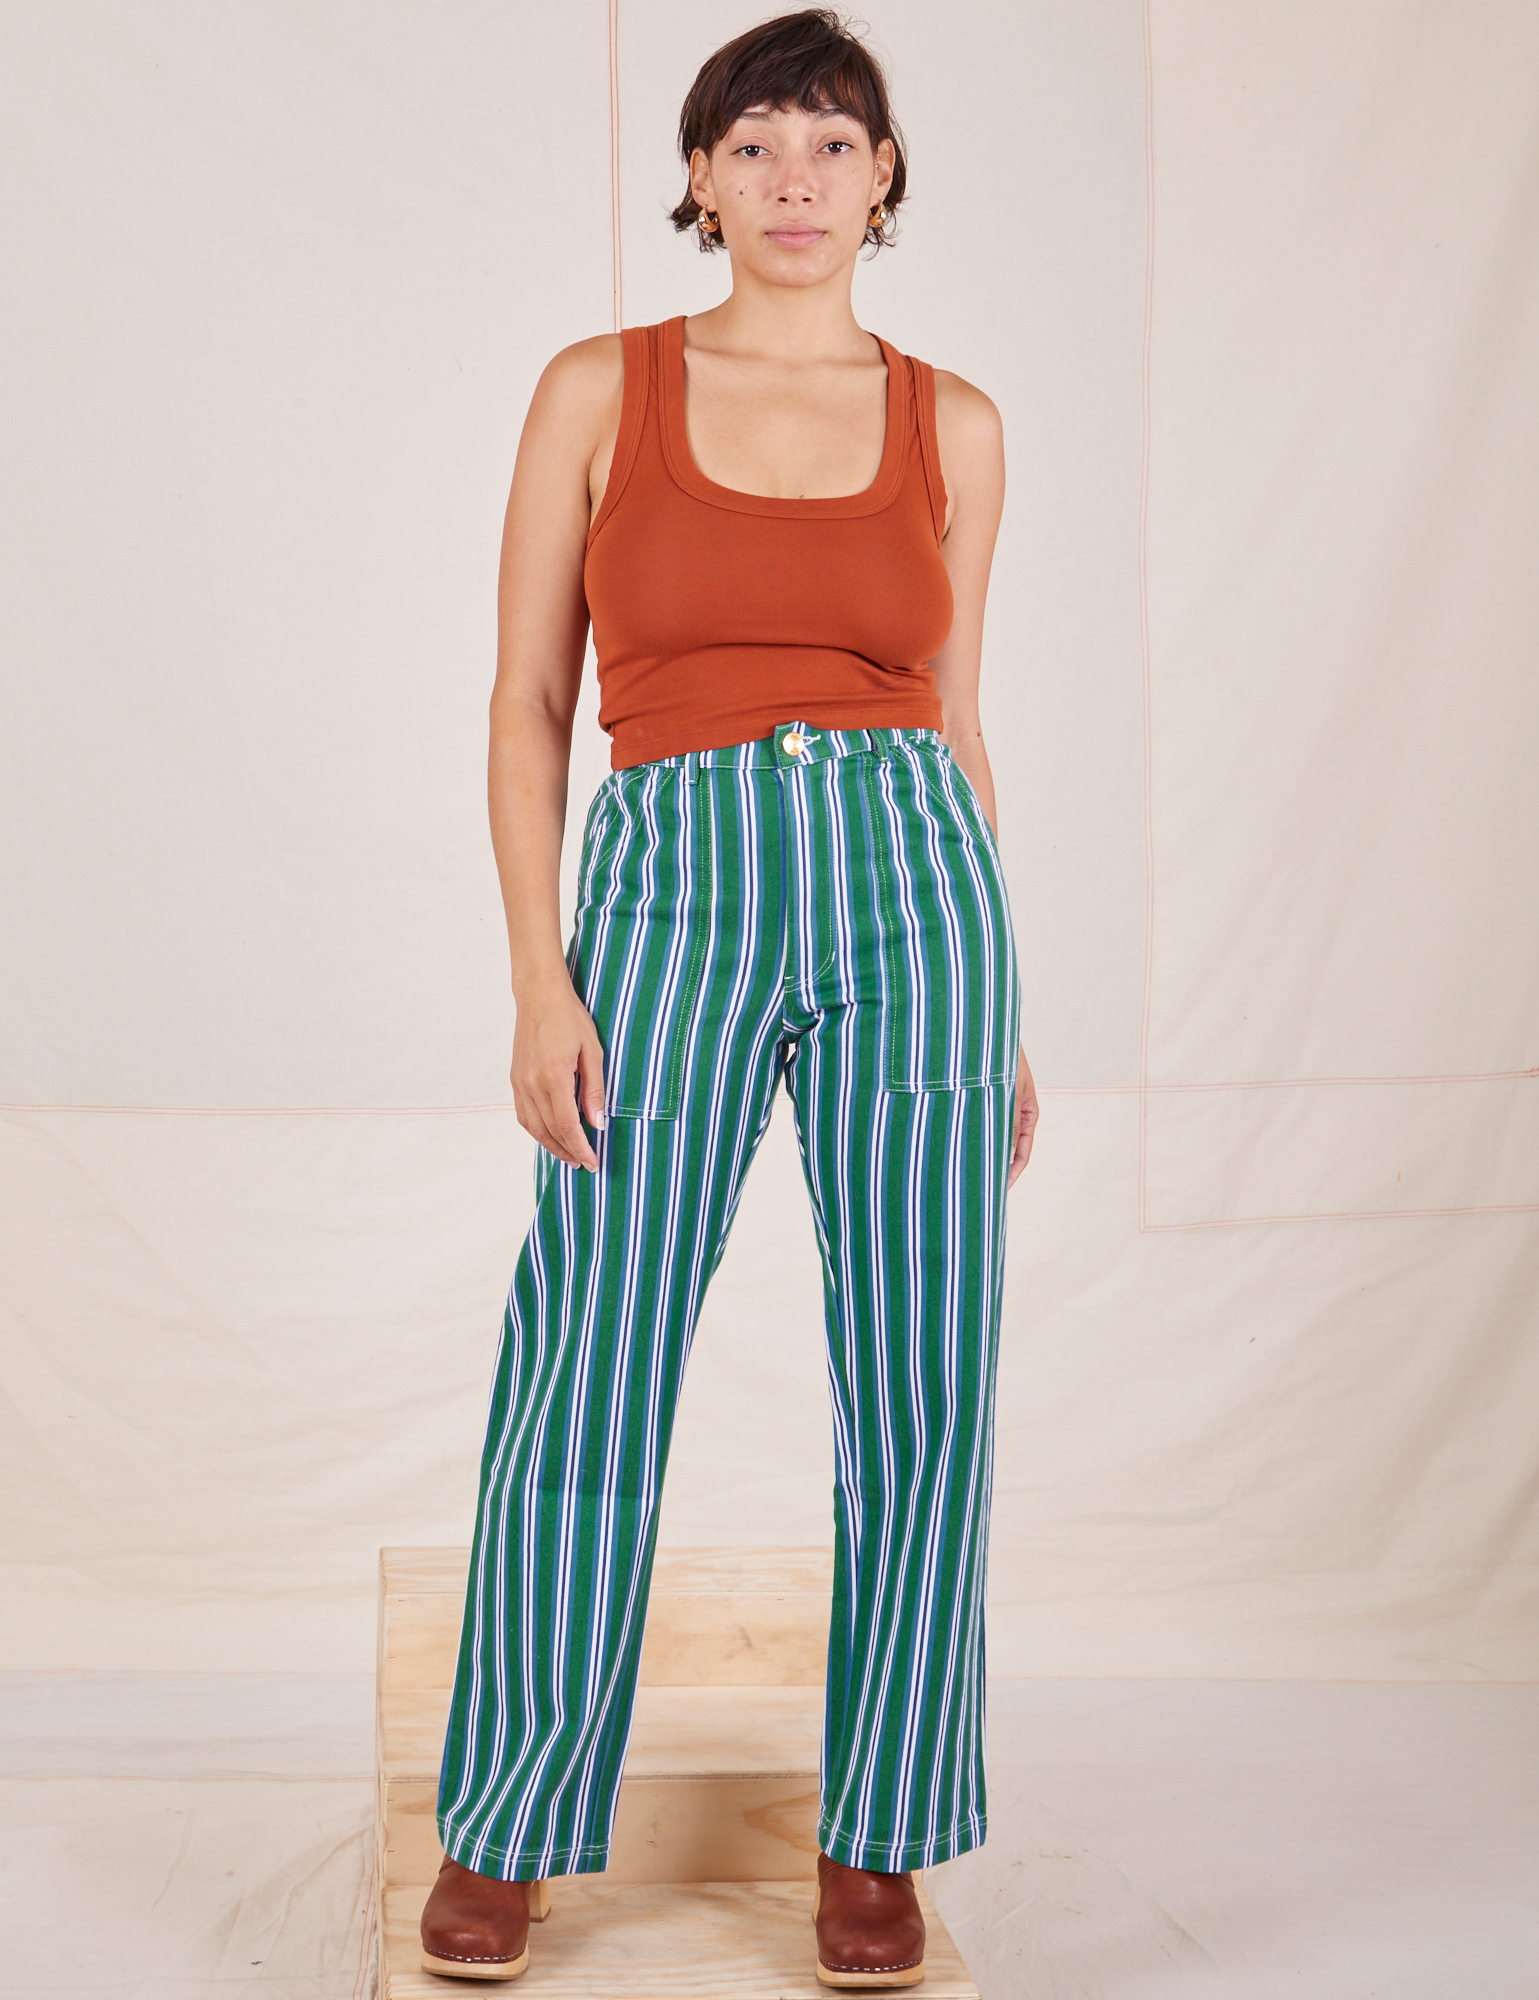 Tiara is 5&#39;4&quot; and wearing S Stripe Work Pants in Green paired with burnt terracotta Cropped Tank